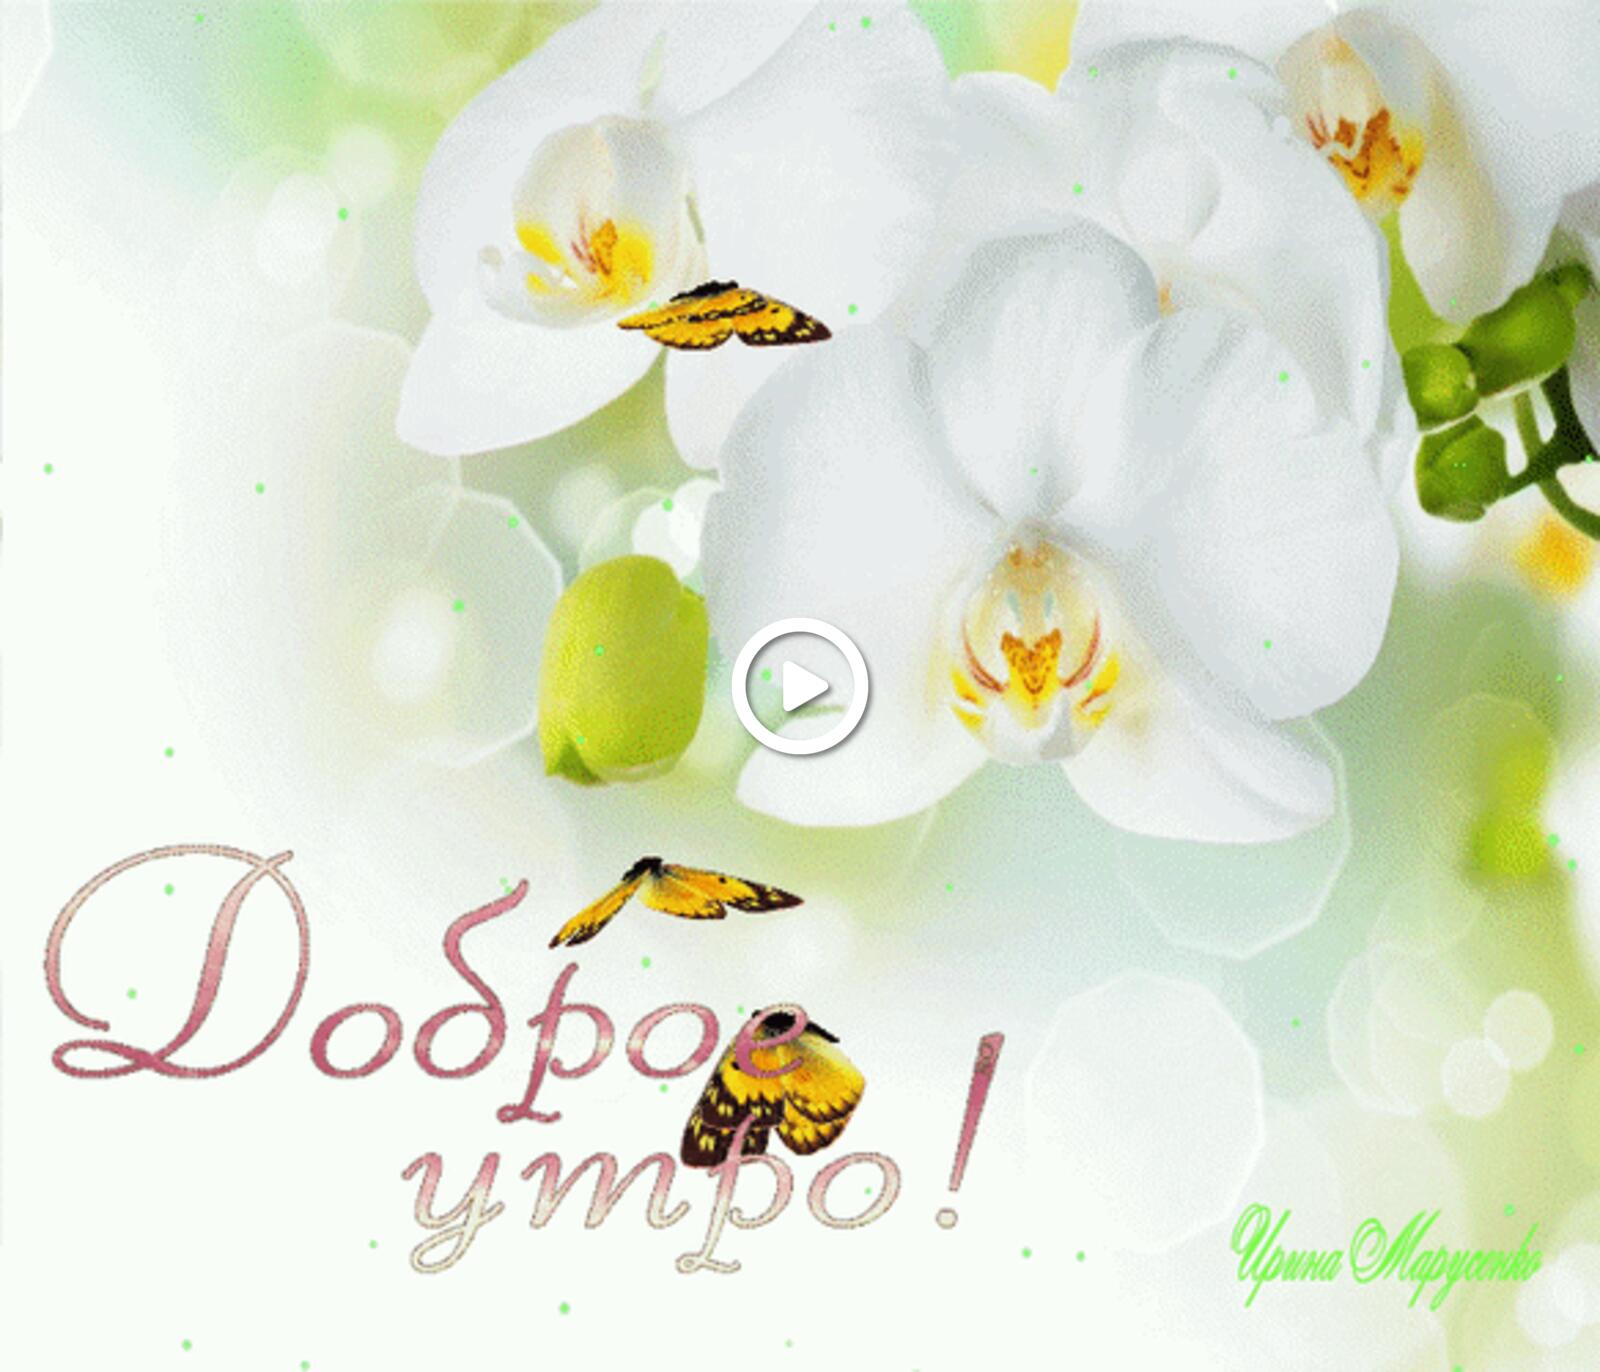 A postcard on the subject of good morning white butterfly orchid good morning orchids for free